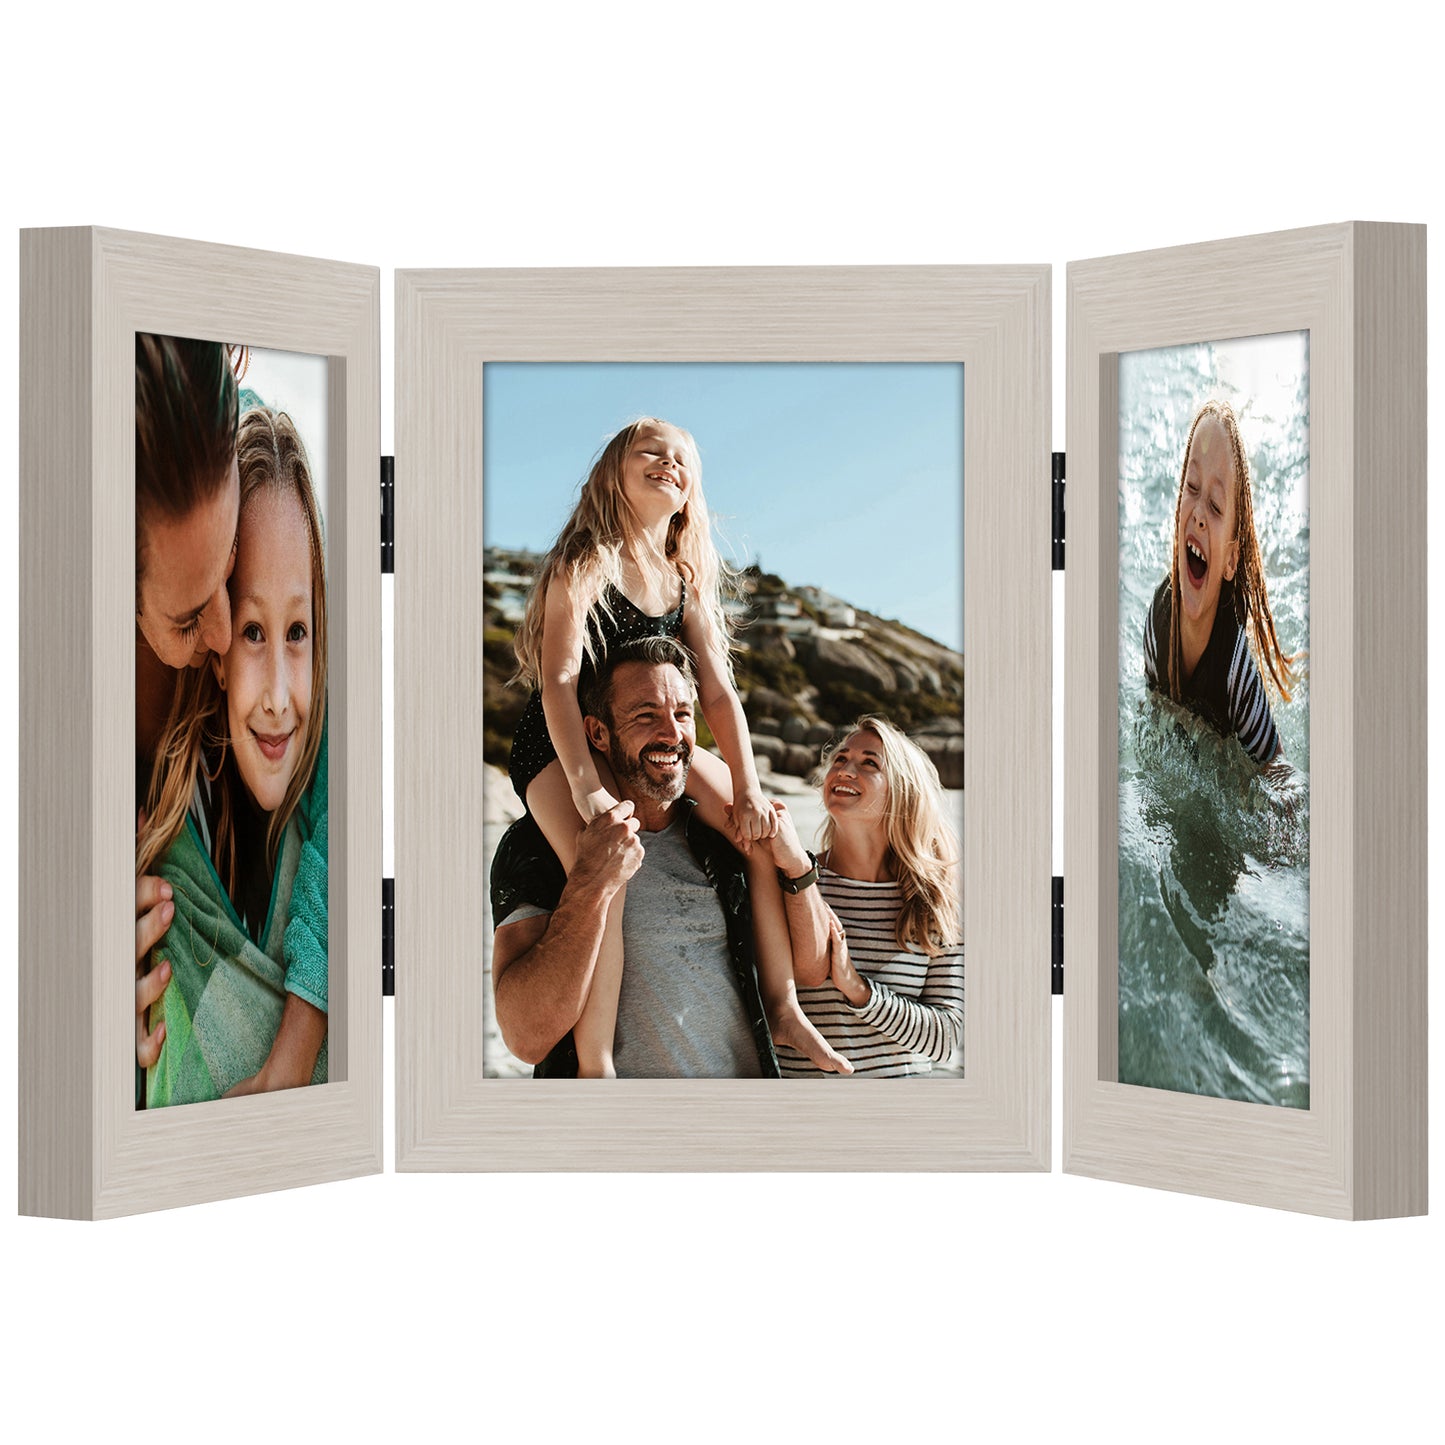 Hinged 3 Photo Picture Frame - Tri Folding Picture Frame For Desk - Displays 3 Photos with Shatter-Resistant Glass Covers